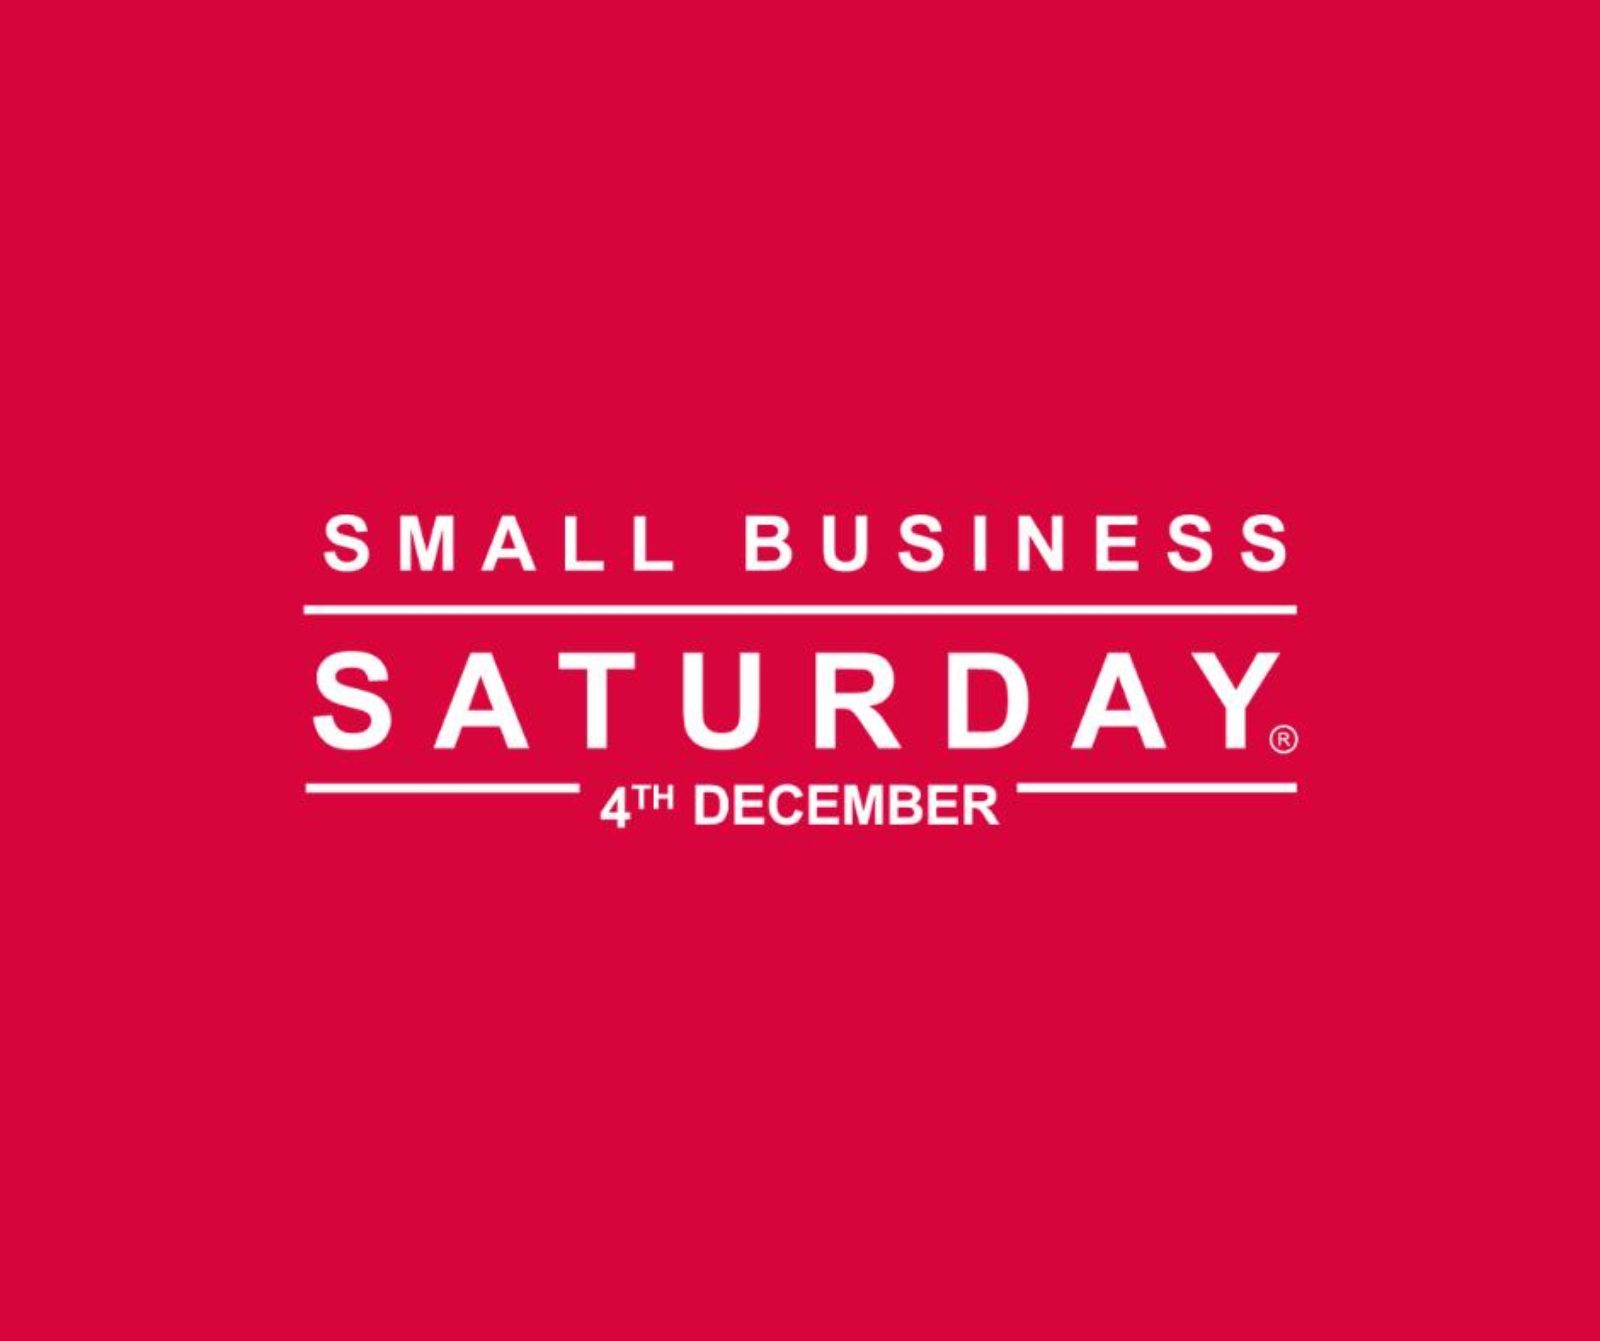 Small Business Saturday logo with red background